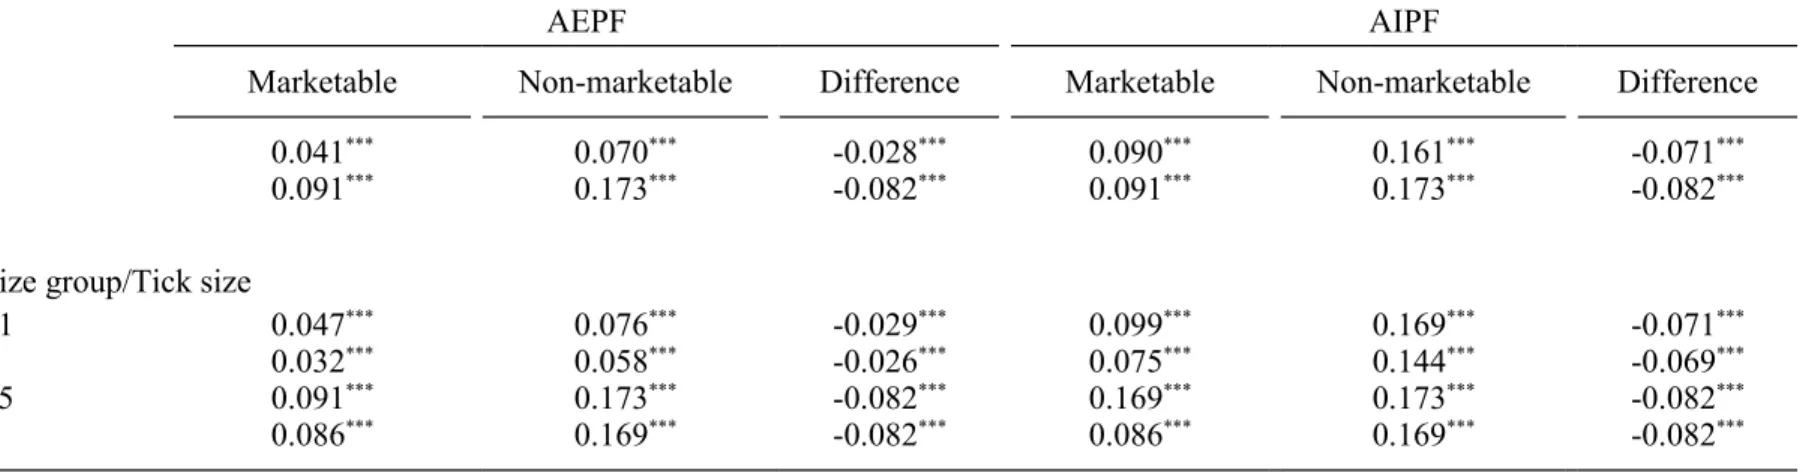 Table 3. Price clustering of marketable and non-marketable limit orders